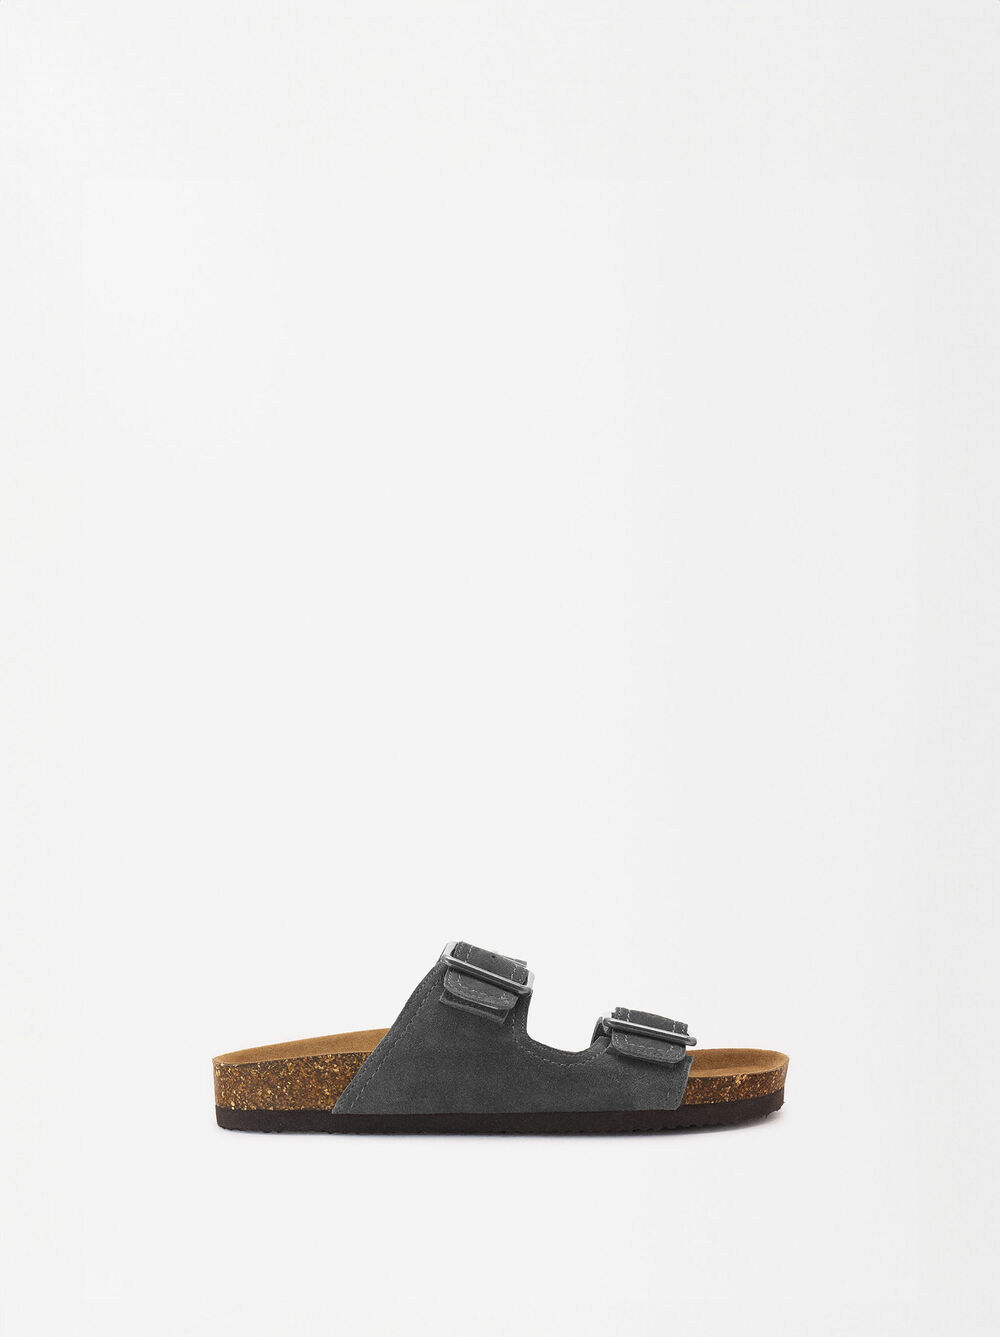 Sandals With Leather Buckles